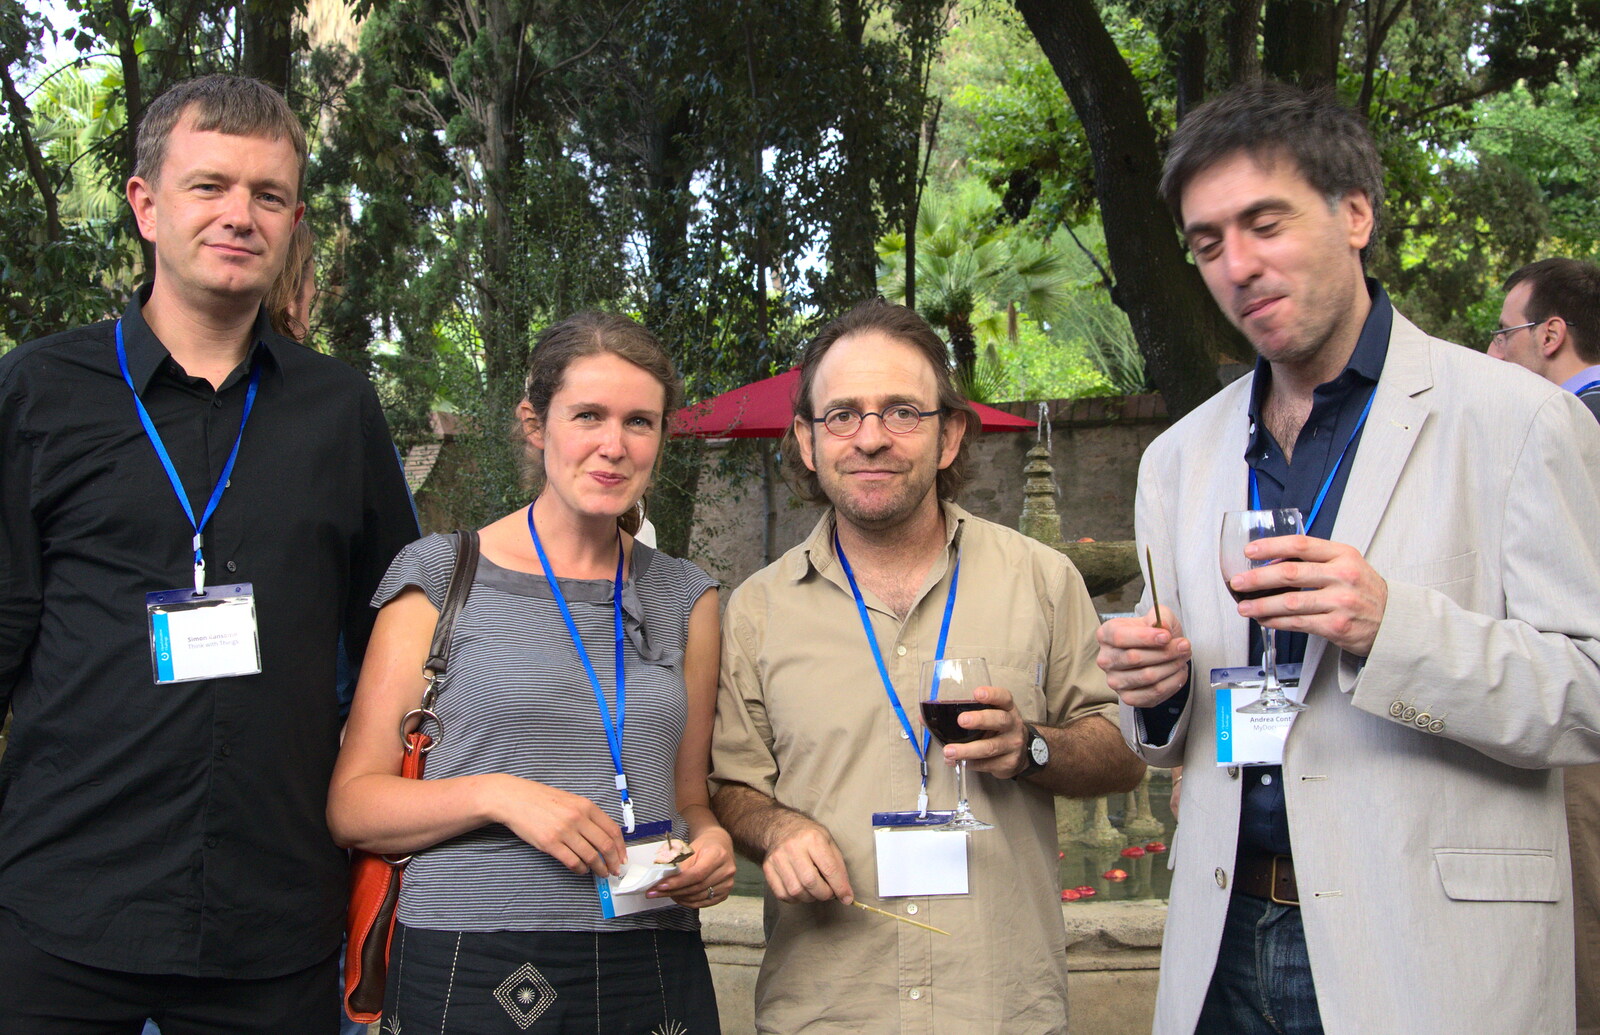 Isobel with some OEC panel members and participants from The Open Education Challenge, Barcelona, Catalonia - 13th July 2014